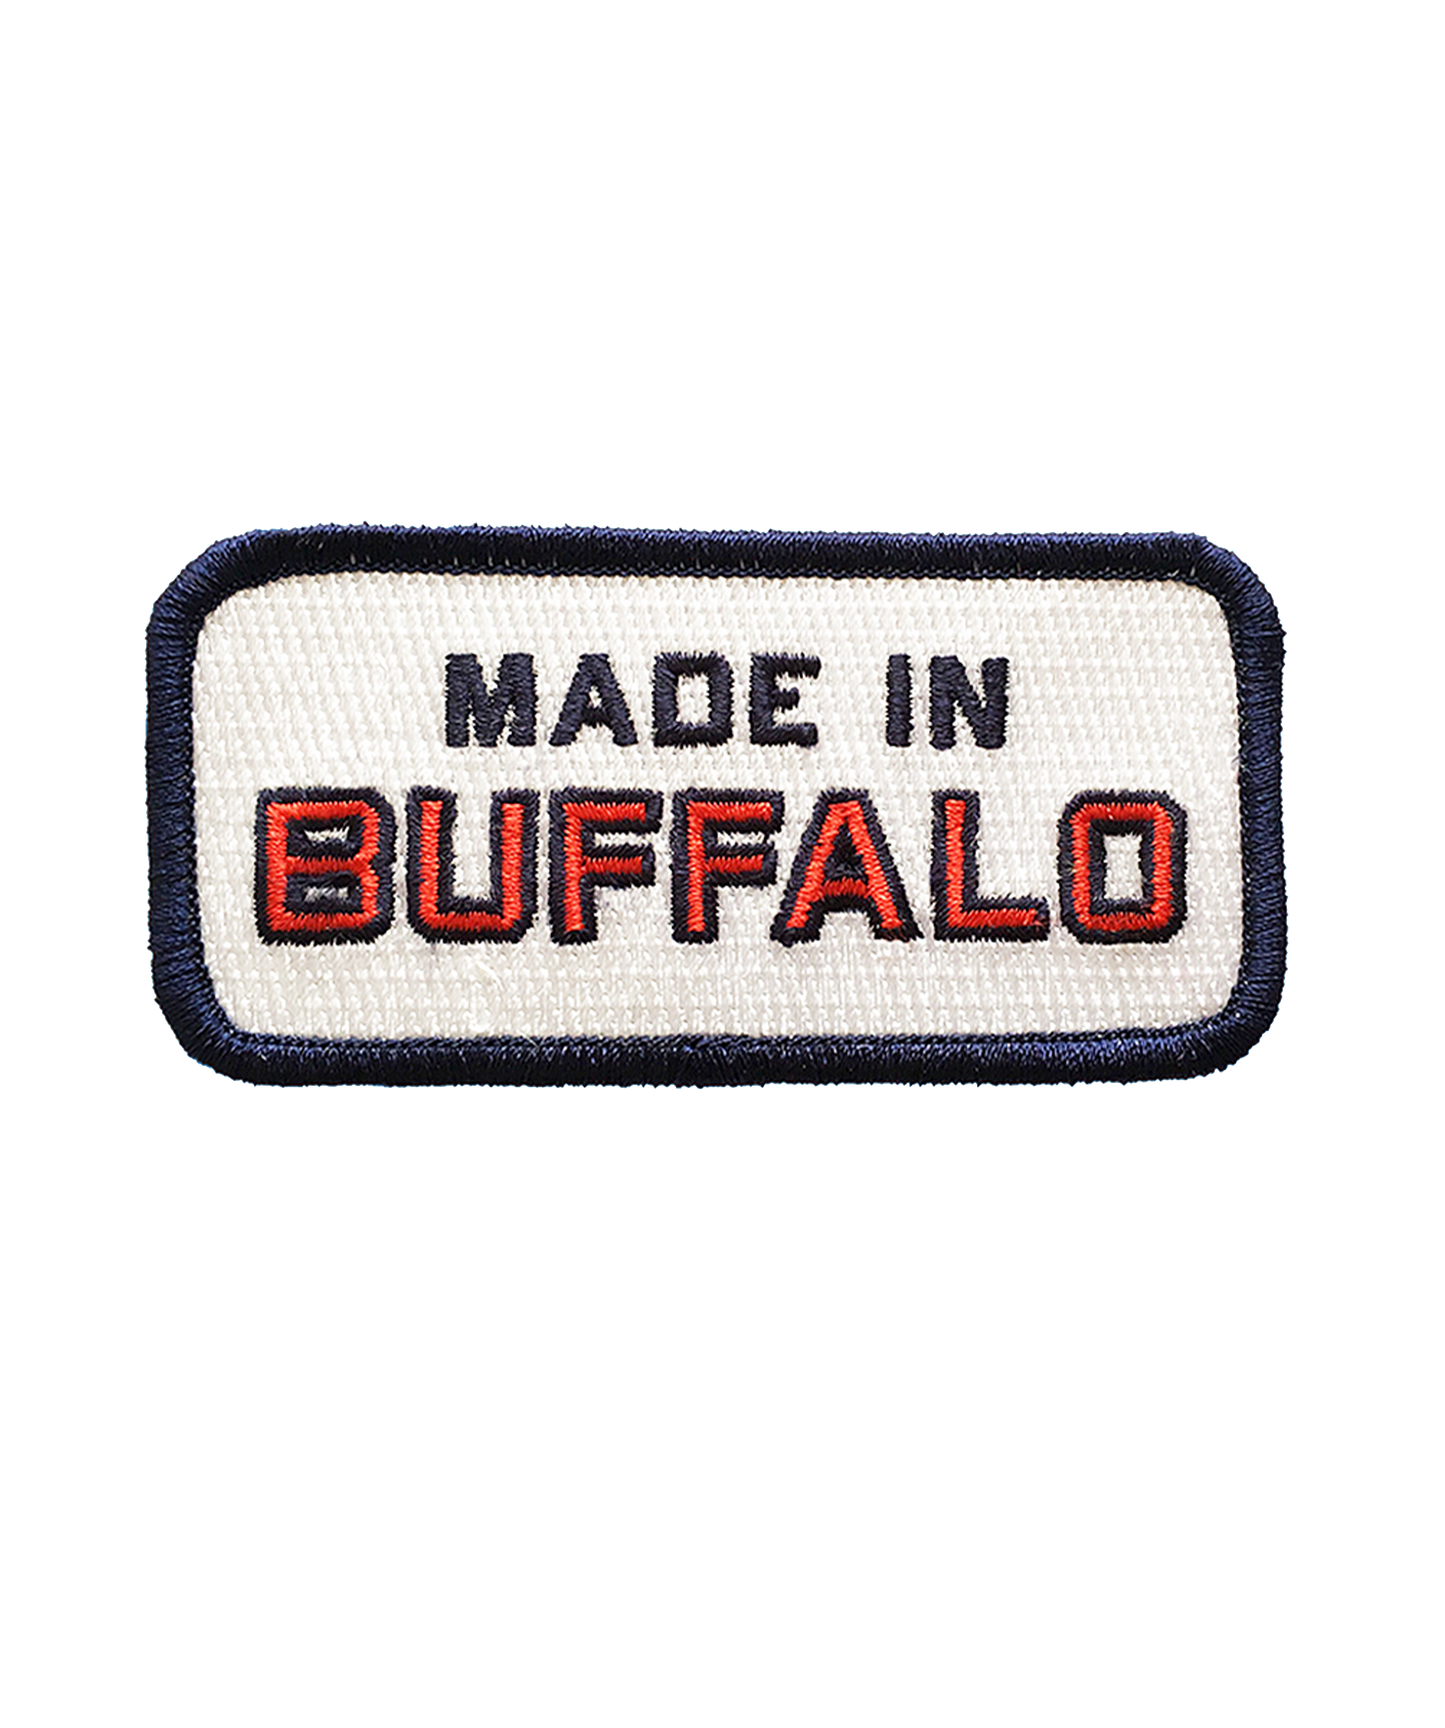 Made In USA Rainbow Embroidered Patch